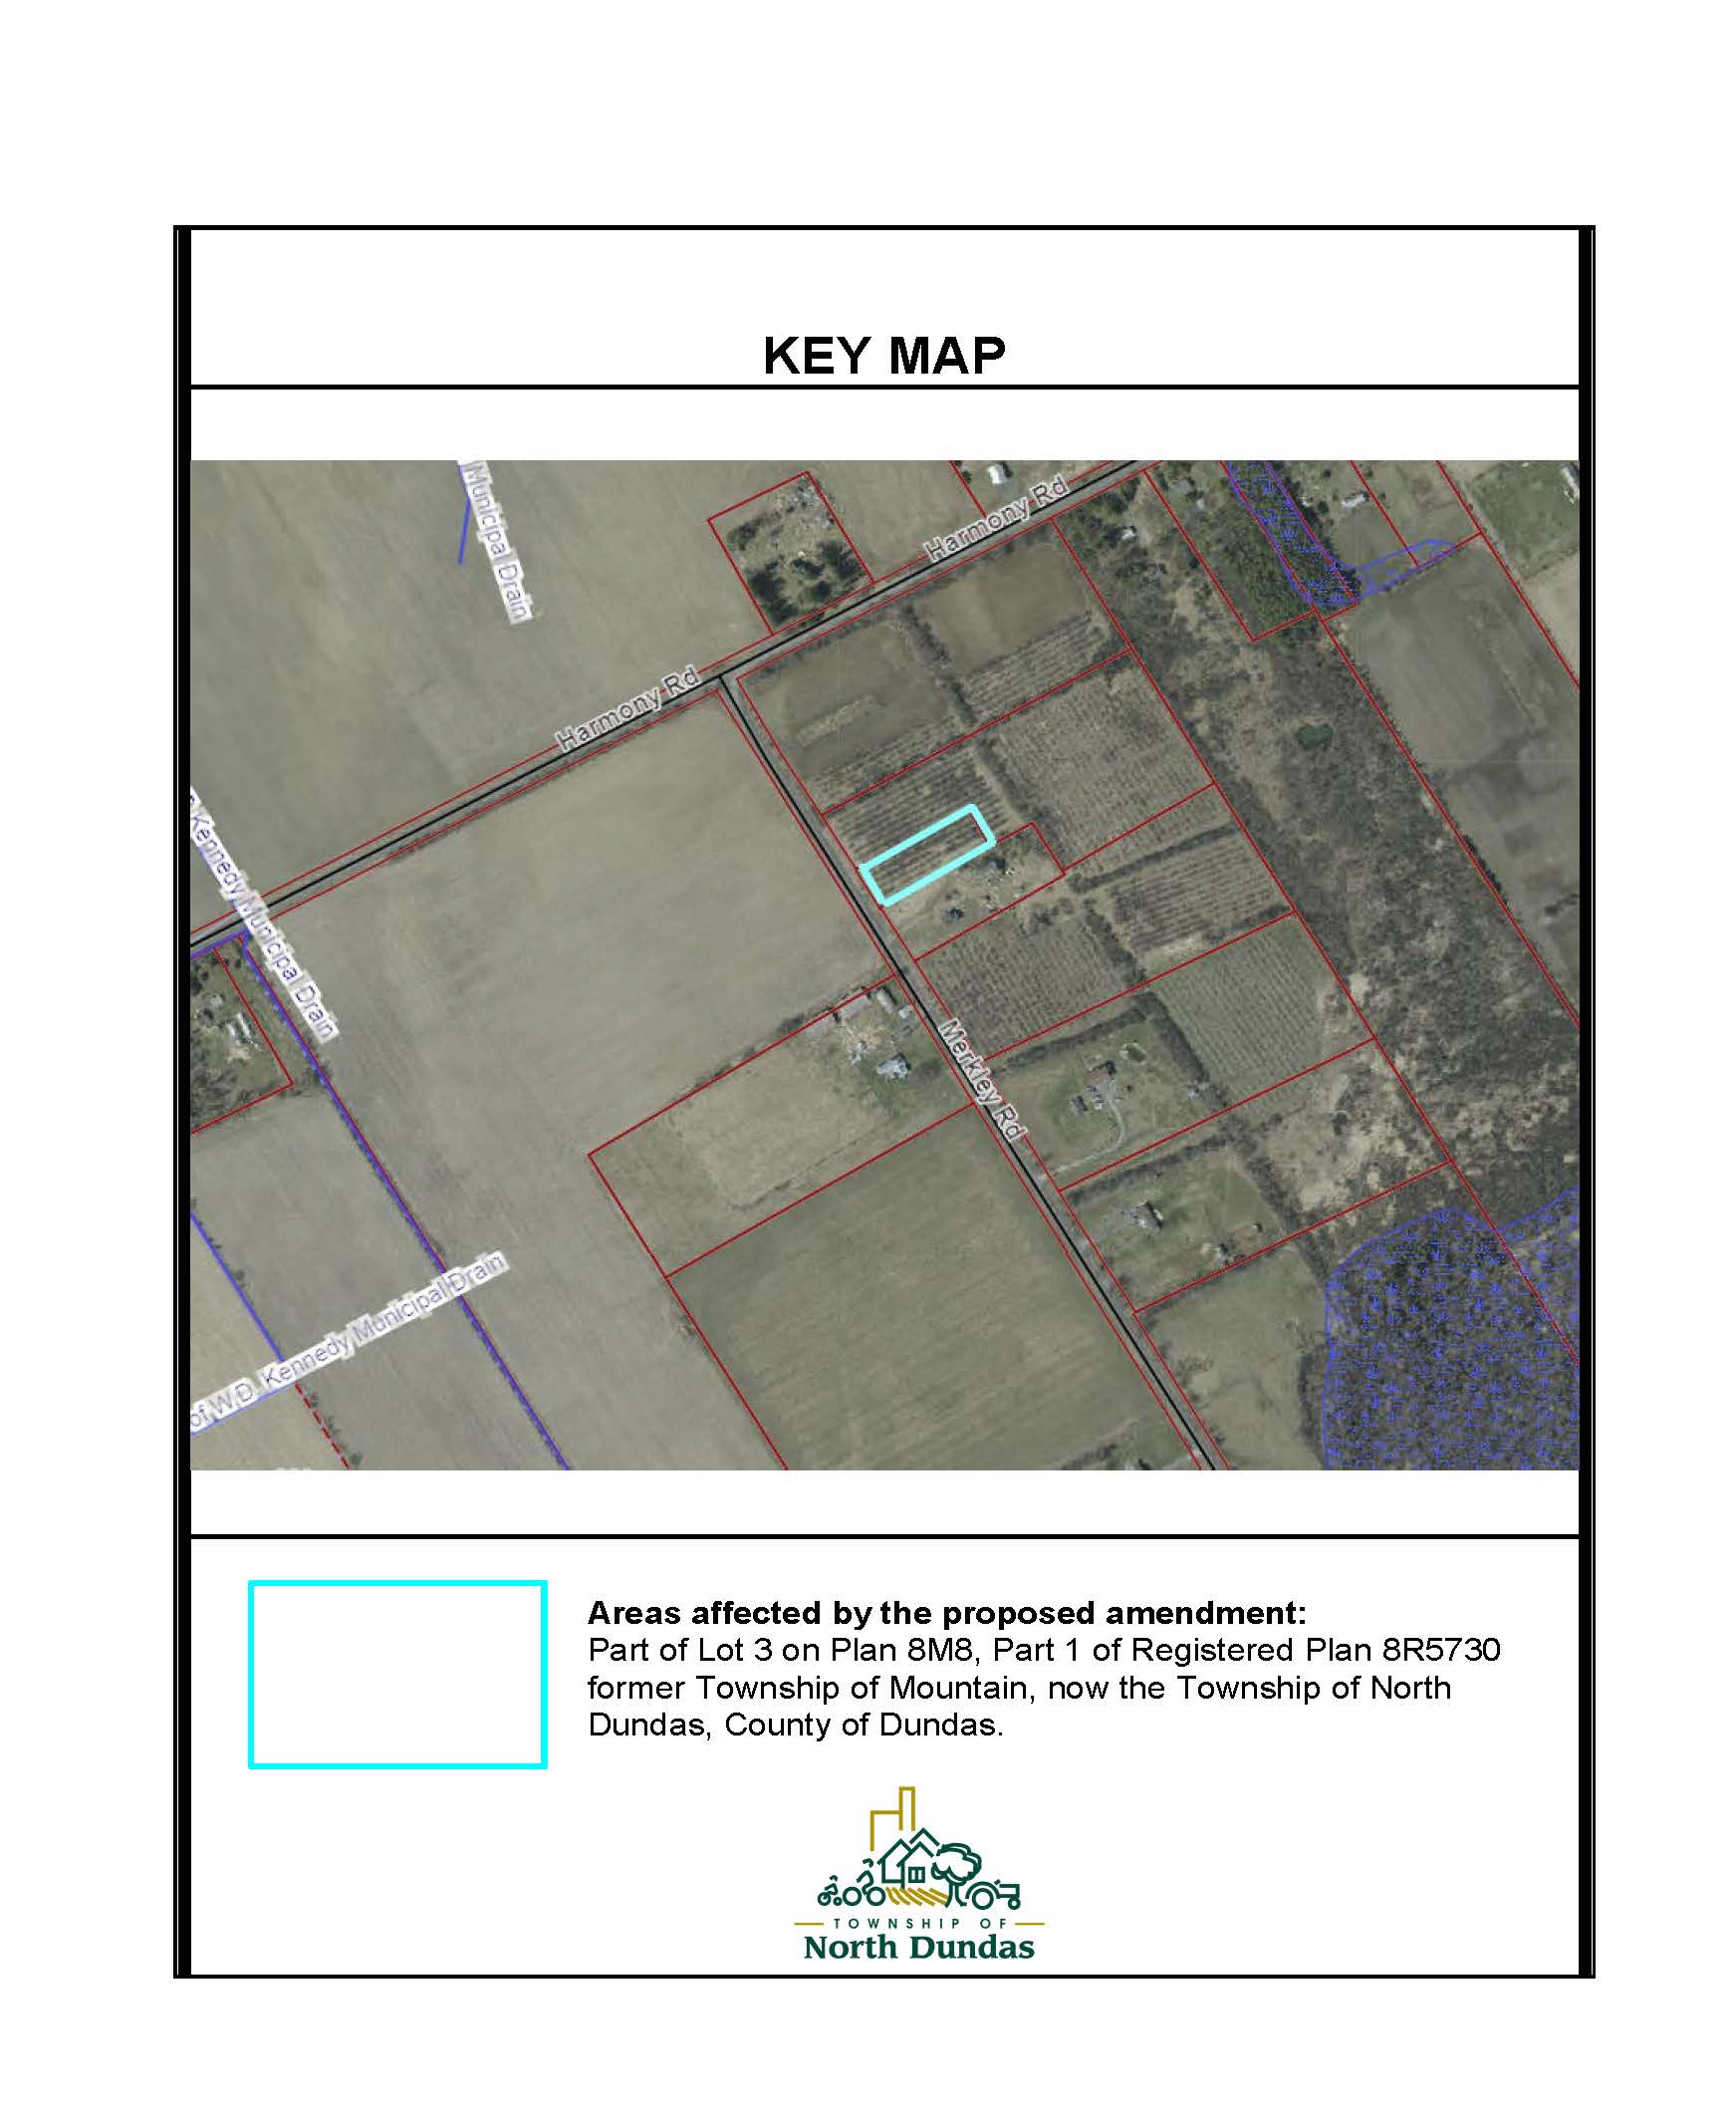 Part of Lot 3 on Plan 8M8 Map